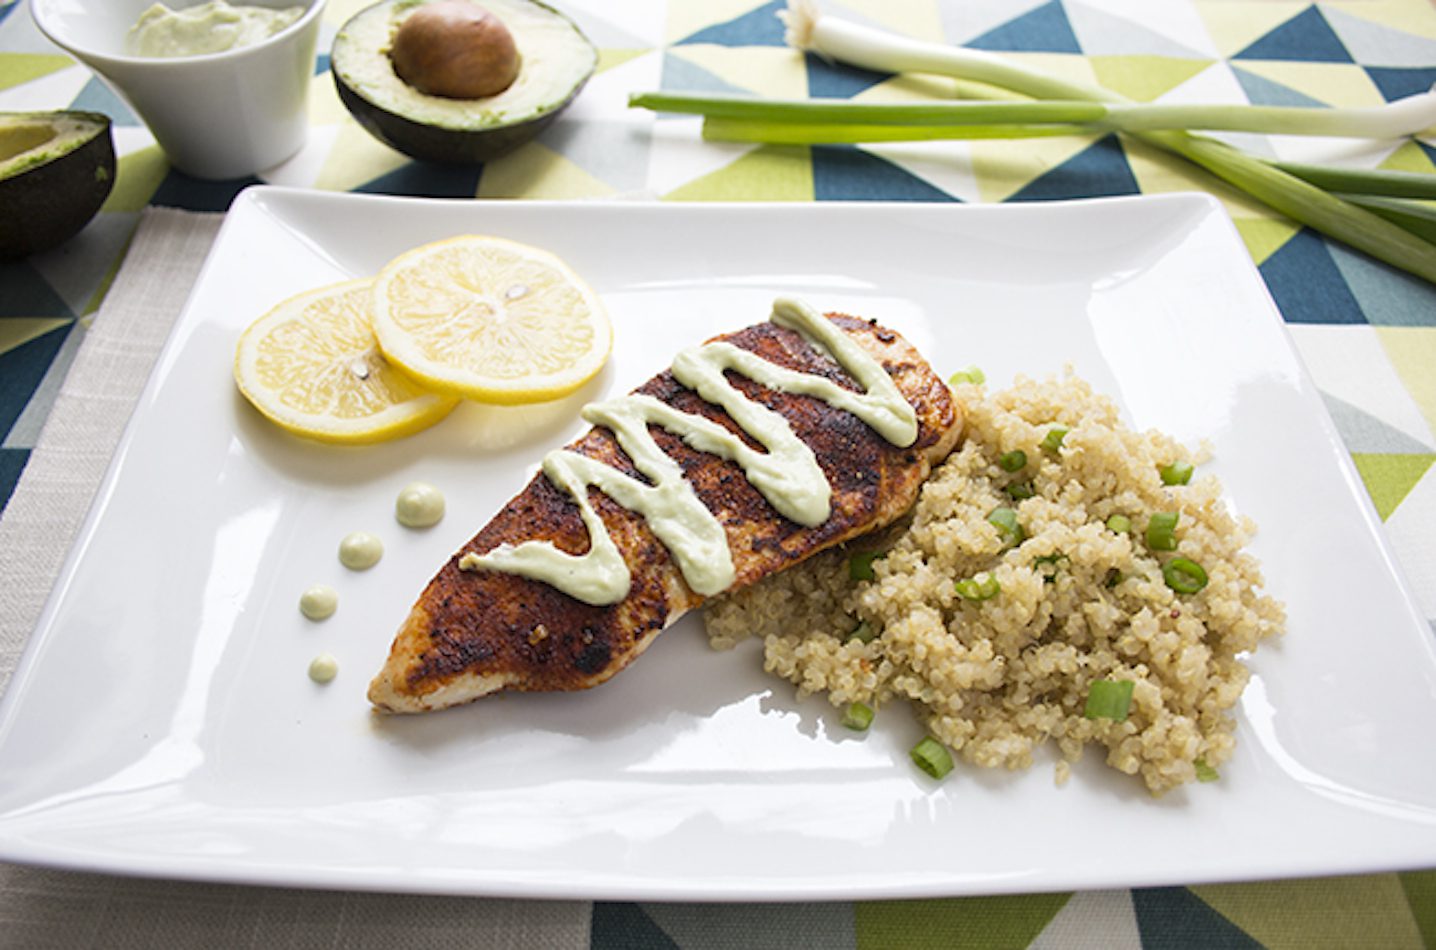 Blackened chicken with avocado cream sauce displayed on a white plate alongside rice sitting on a colorful tablecloth